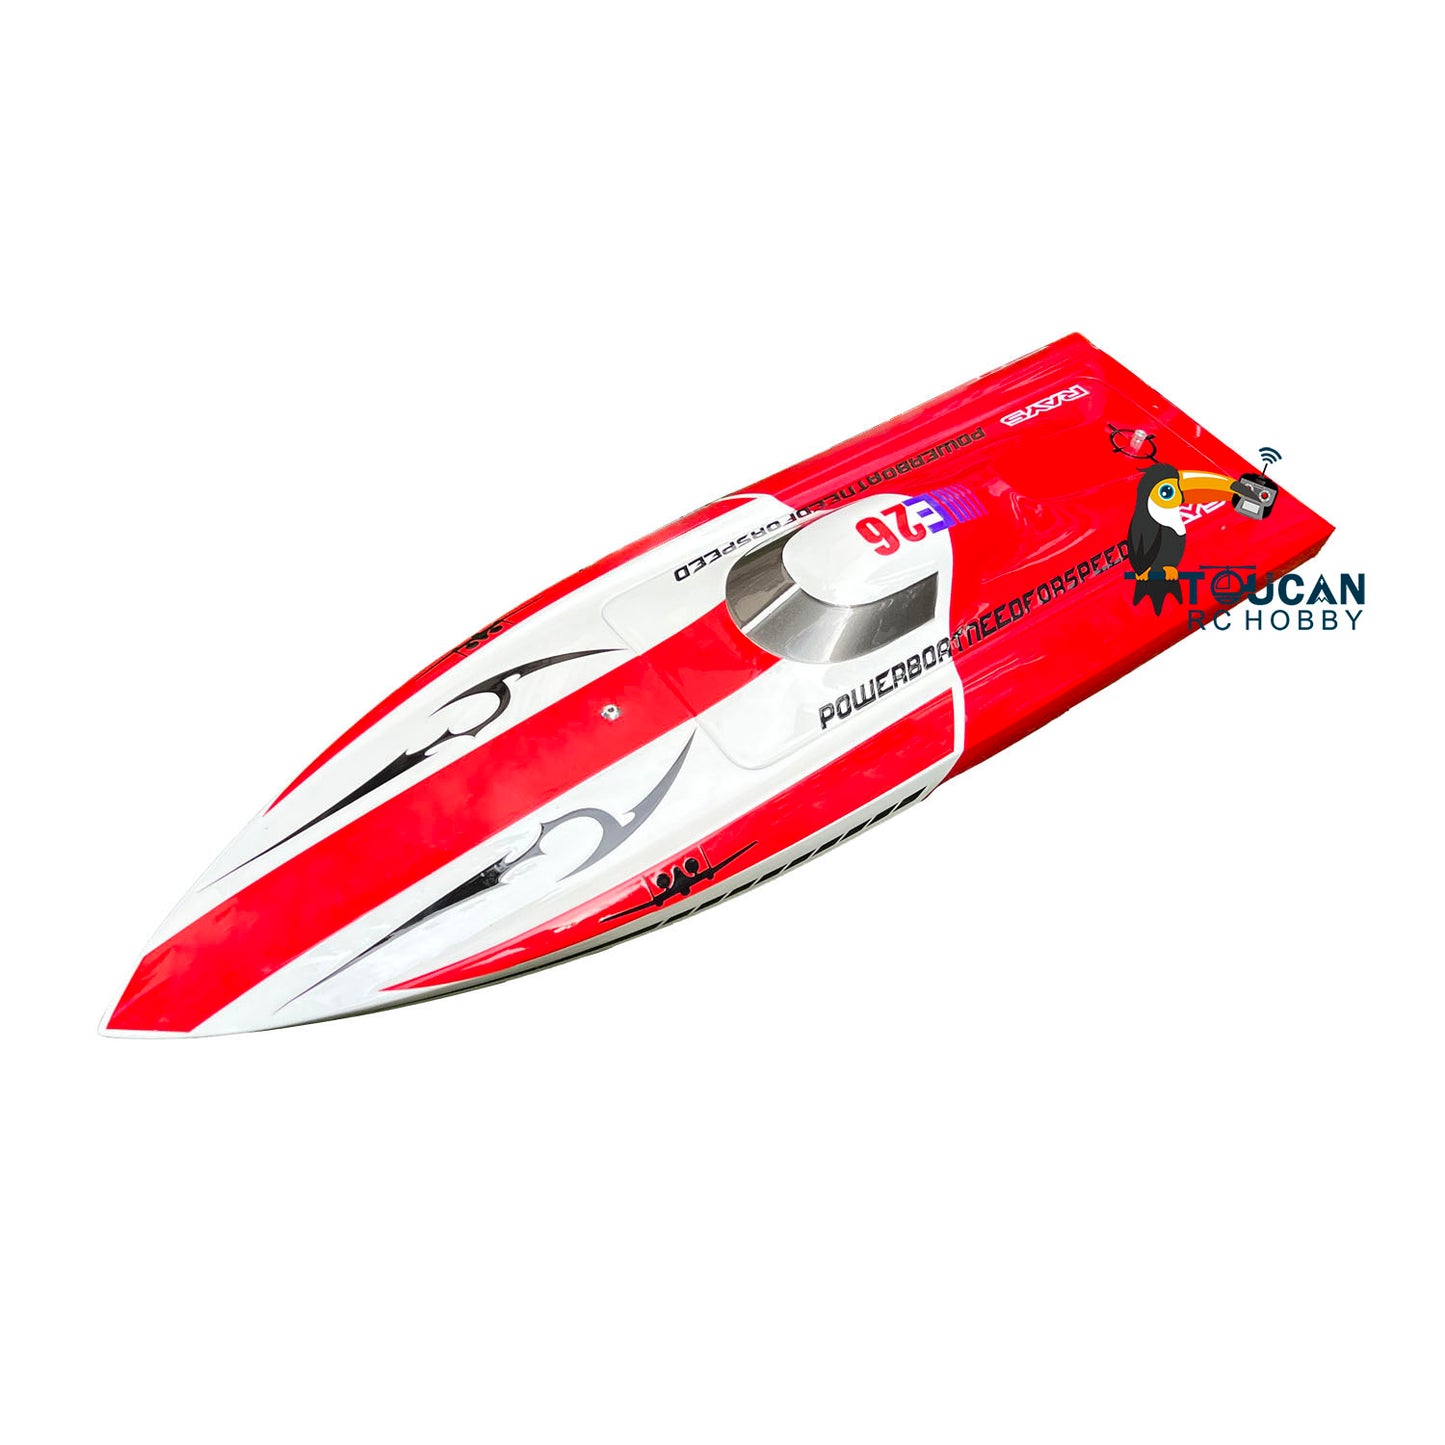 E26 Prepainted Fiber Glass 640*195*105mm Red Yellow Electric Racing KIT RC Boat Hull Thunder for Advanced Player DIY Model Gift